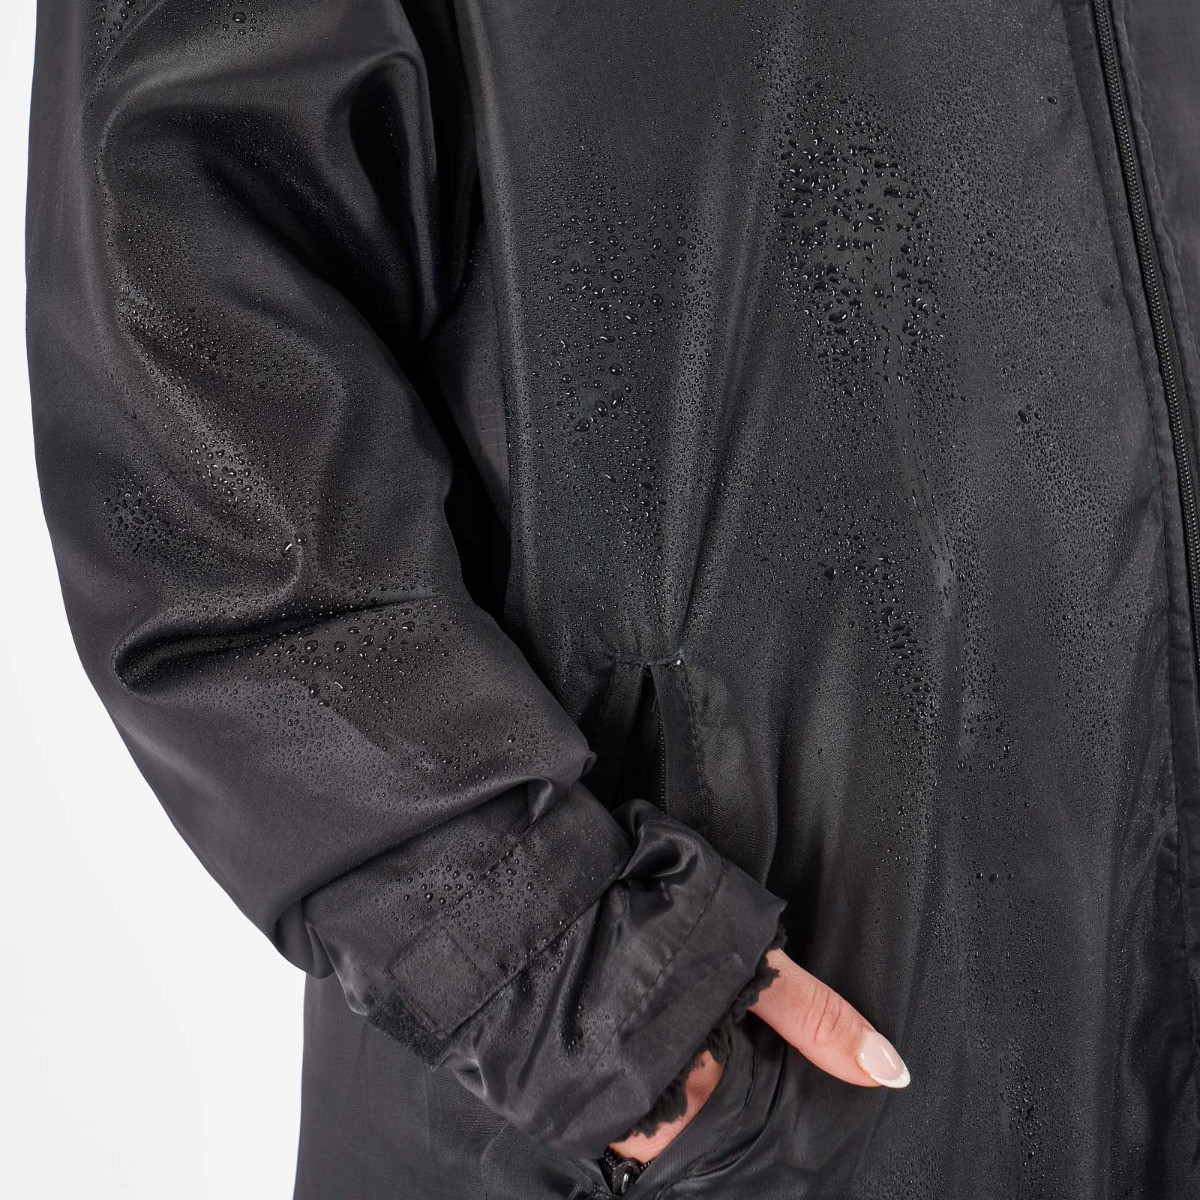 OHS Water Resistant Full Zip Changing Robe, Black - M/L>